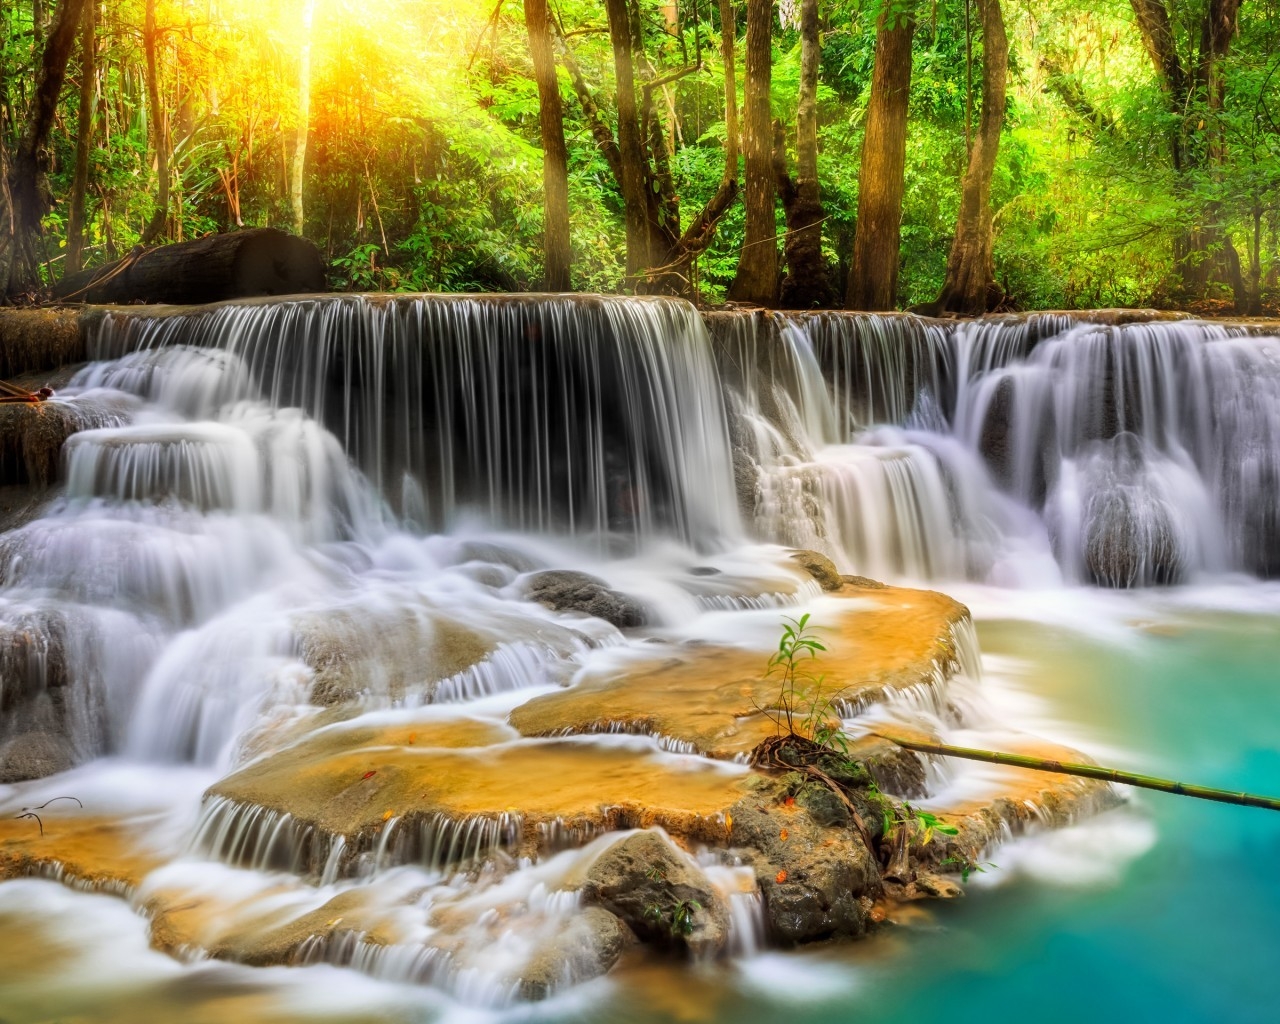 Waterfall in Thailand for 1280 x 1024 resolution